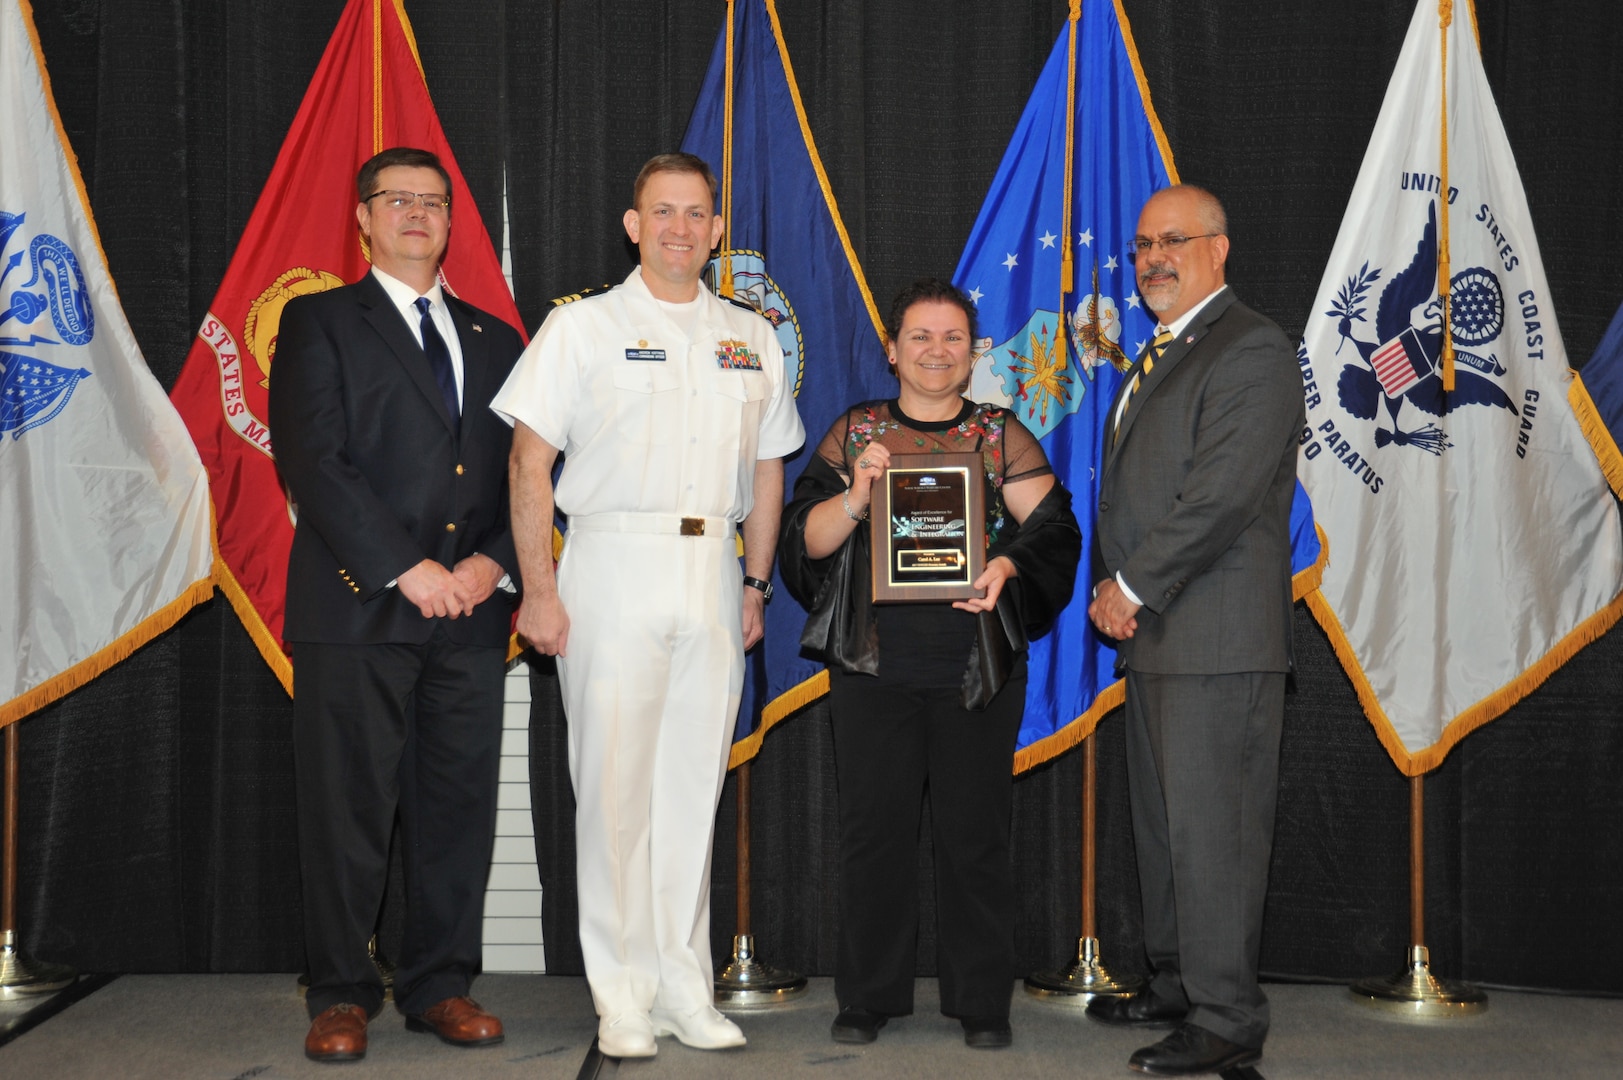 IMAGE: Carol Lee is presented the  NSWCDD Award of Excellence for Software Engineering and Integration at Naval Surface Warfare Center Dahlgren Division's annual awards ceremony, Apr. 26 at the Fredericksburg Expo and Conference Center.

The NSWCDD Award of Excellence for Software Engineering and Integration was established to recognize individuals who have made a notable and significant impact to NSWCDD through their outstanding performance in Software Engineering & Integration.